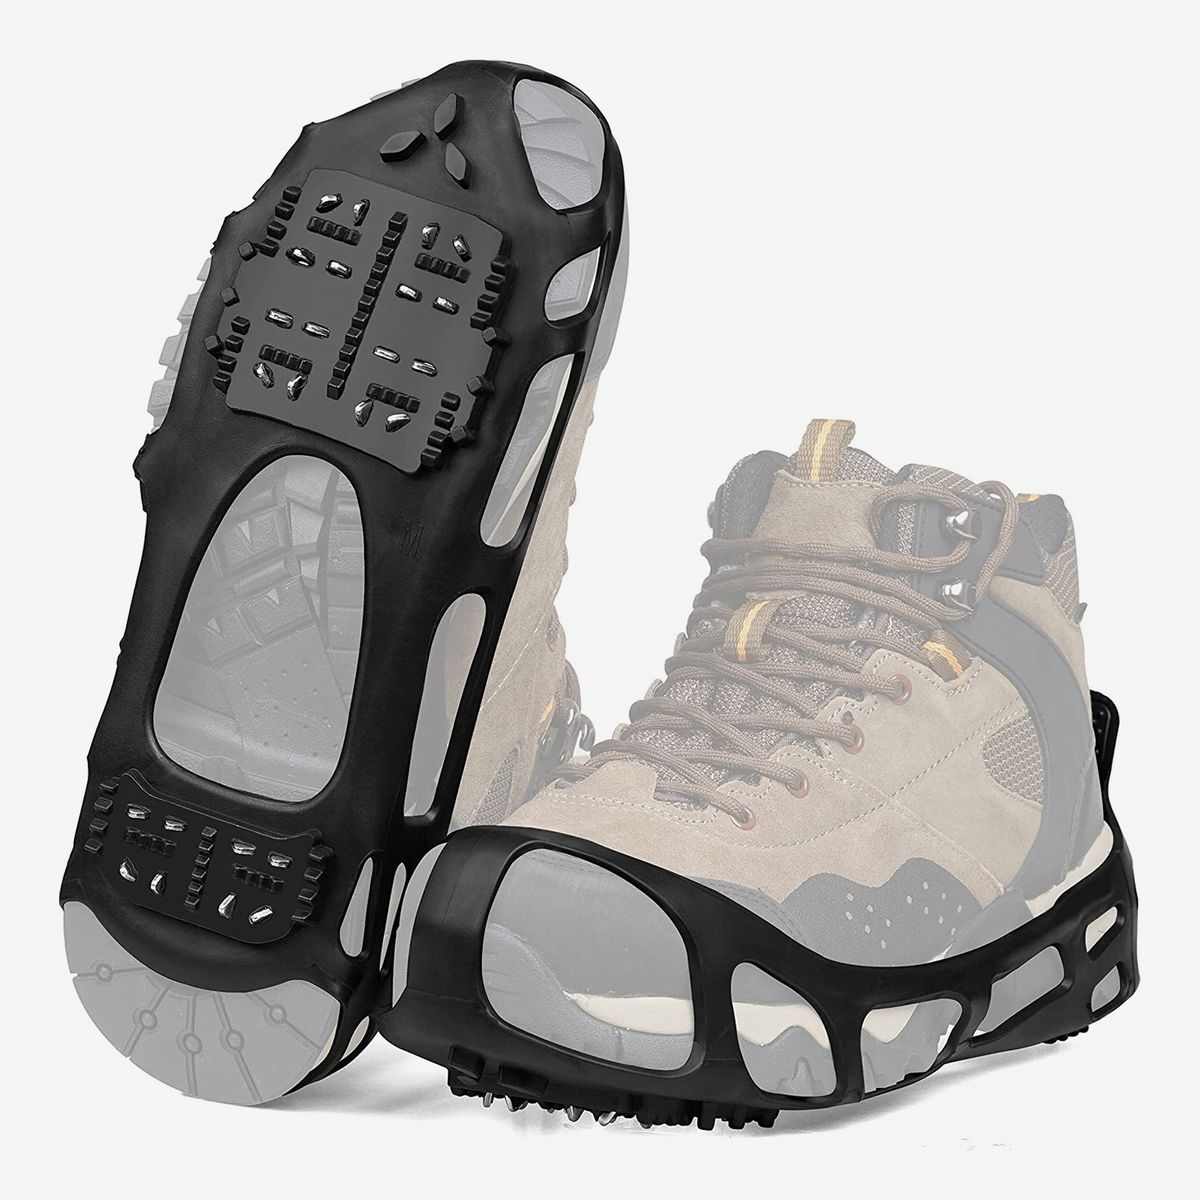 Eras Edge Traction Cleats Makes Walking on Ice and Snow Easier 